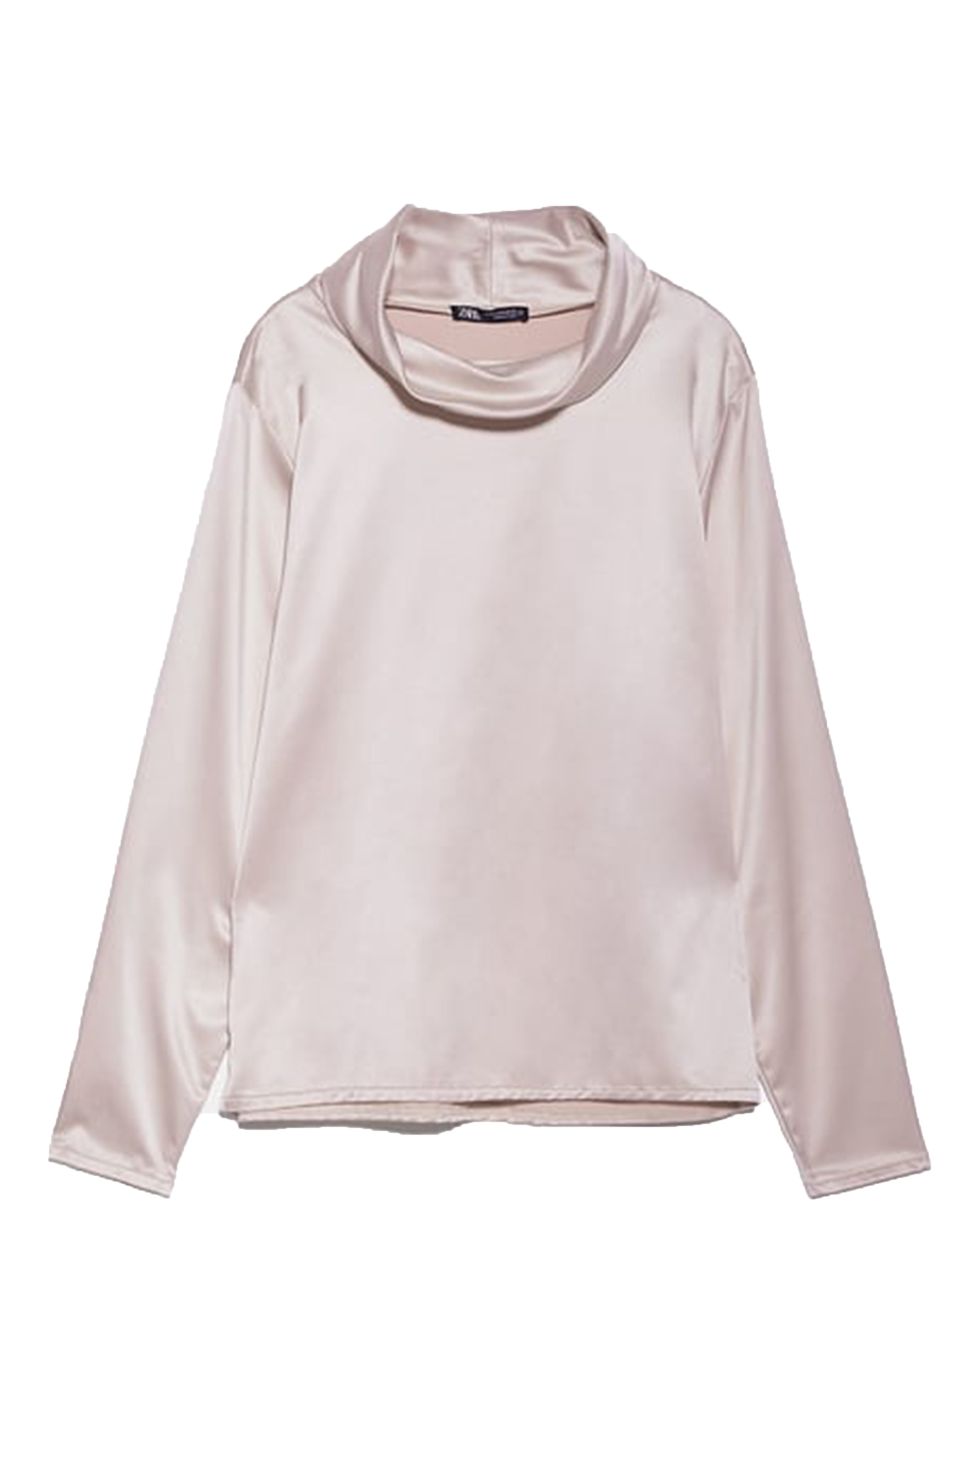 Clothing, White, Sleeve, Pink, Blouse, Outerwear, T-shirt, Neck, Top, Shirt, 